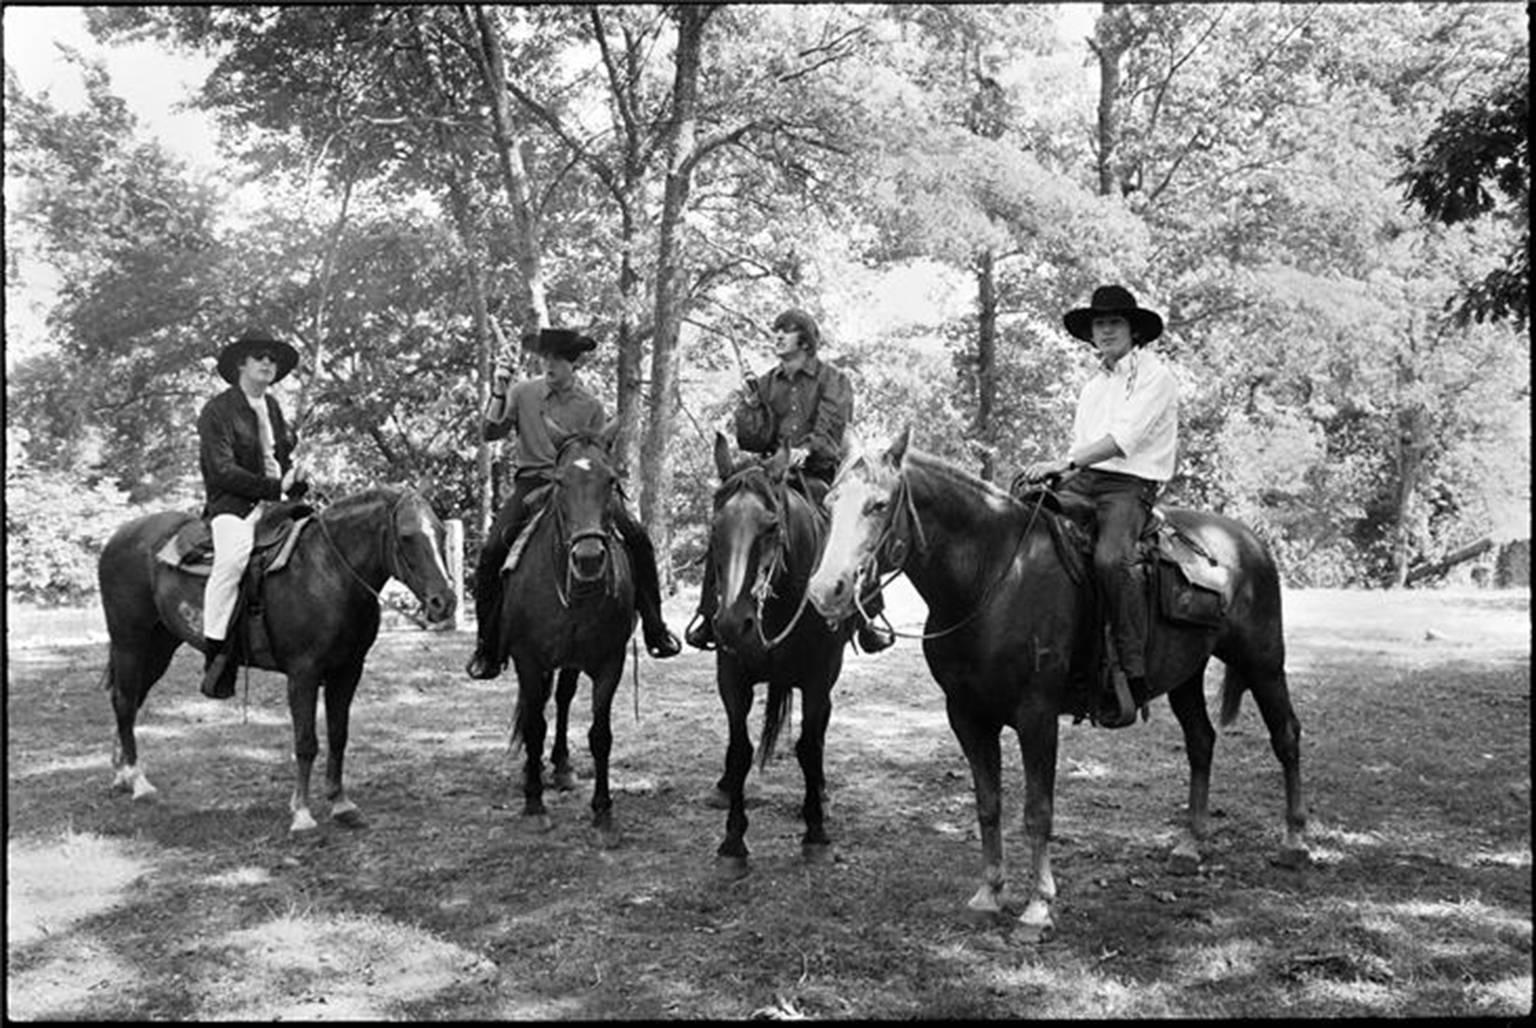 Curt Gunther Black and White Photograph - The Beatles on Horses